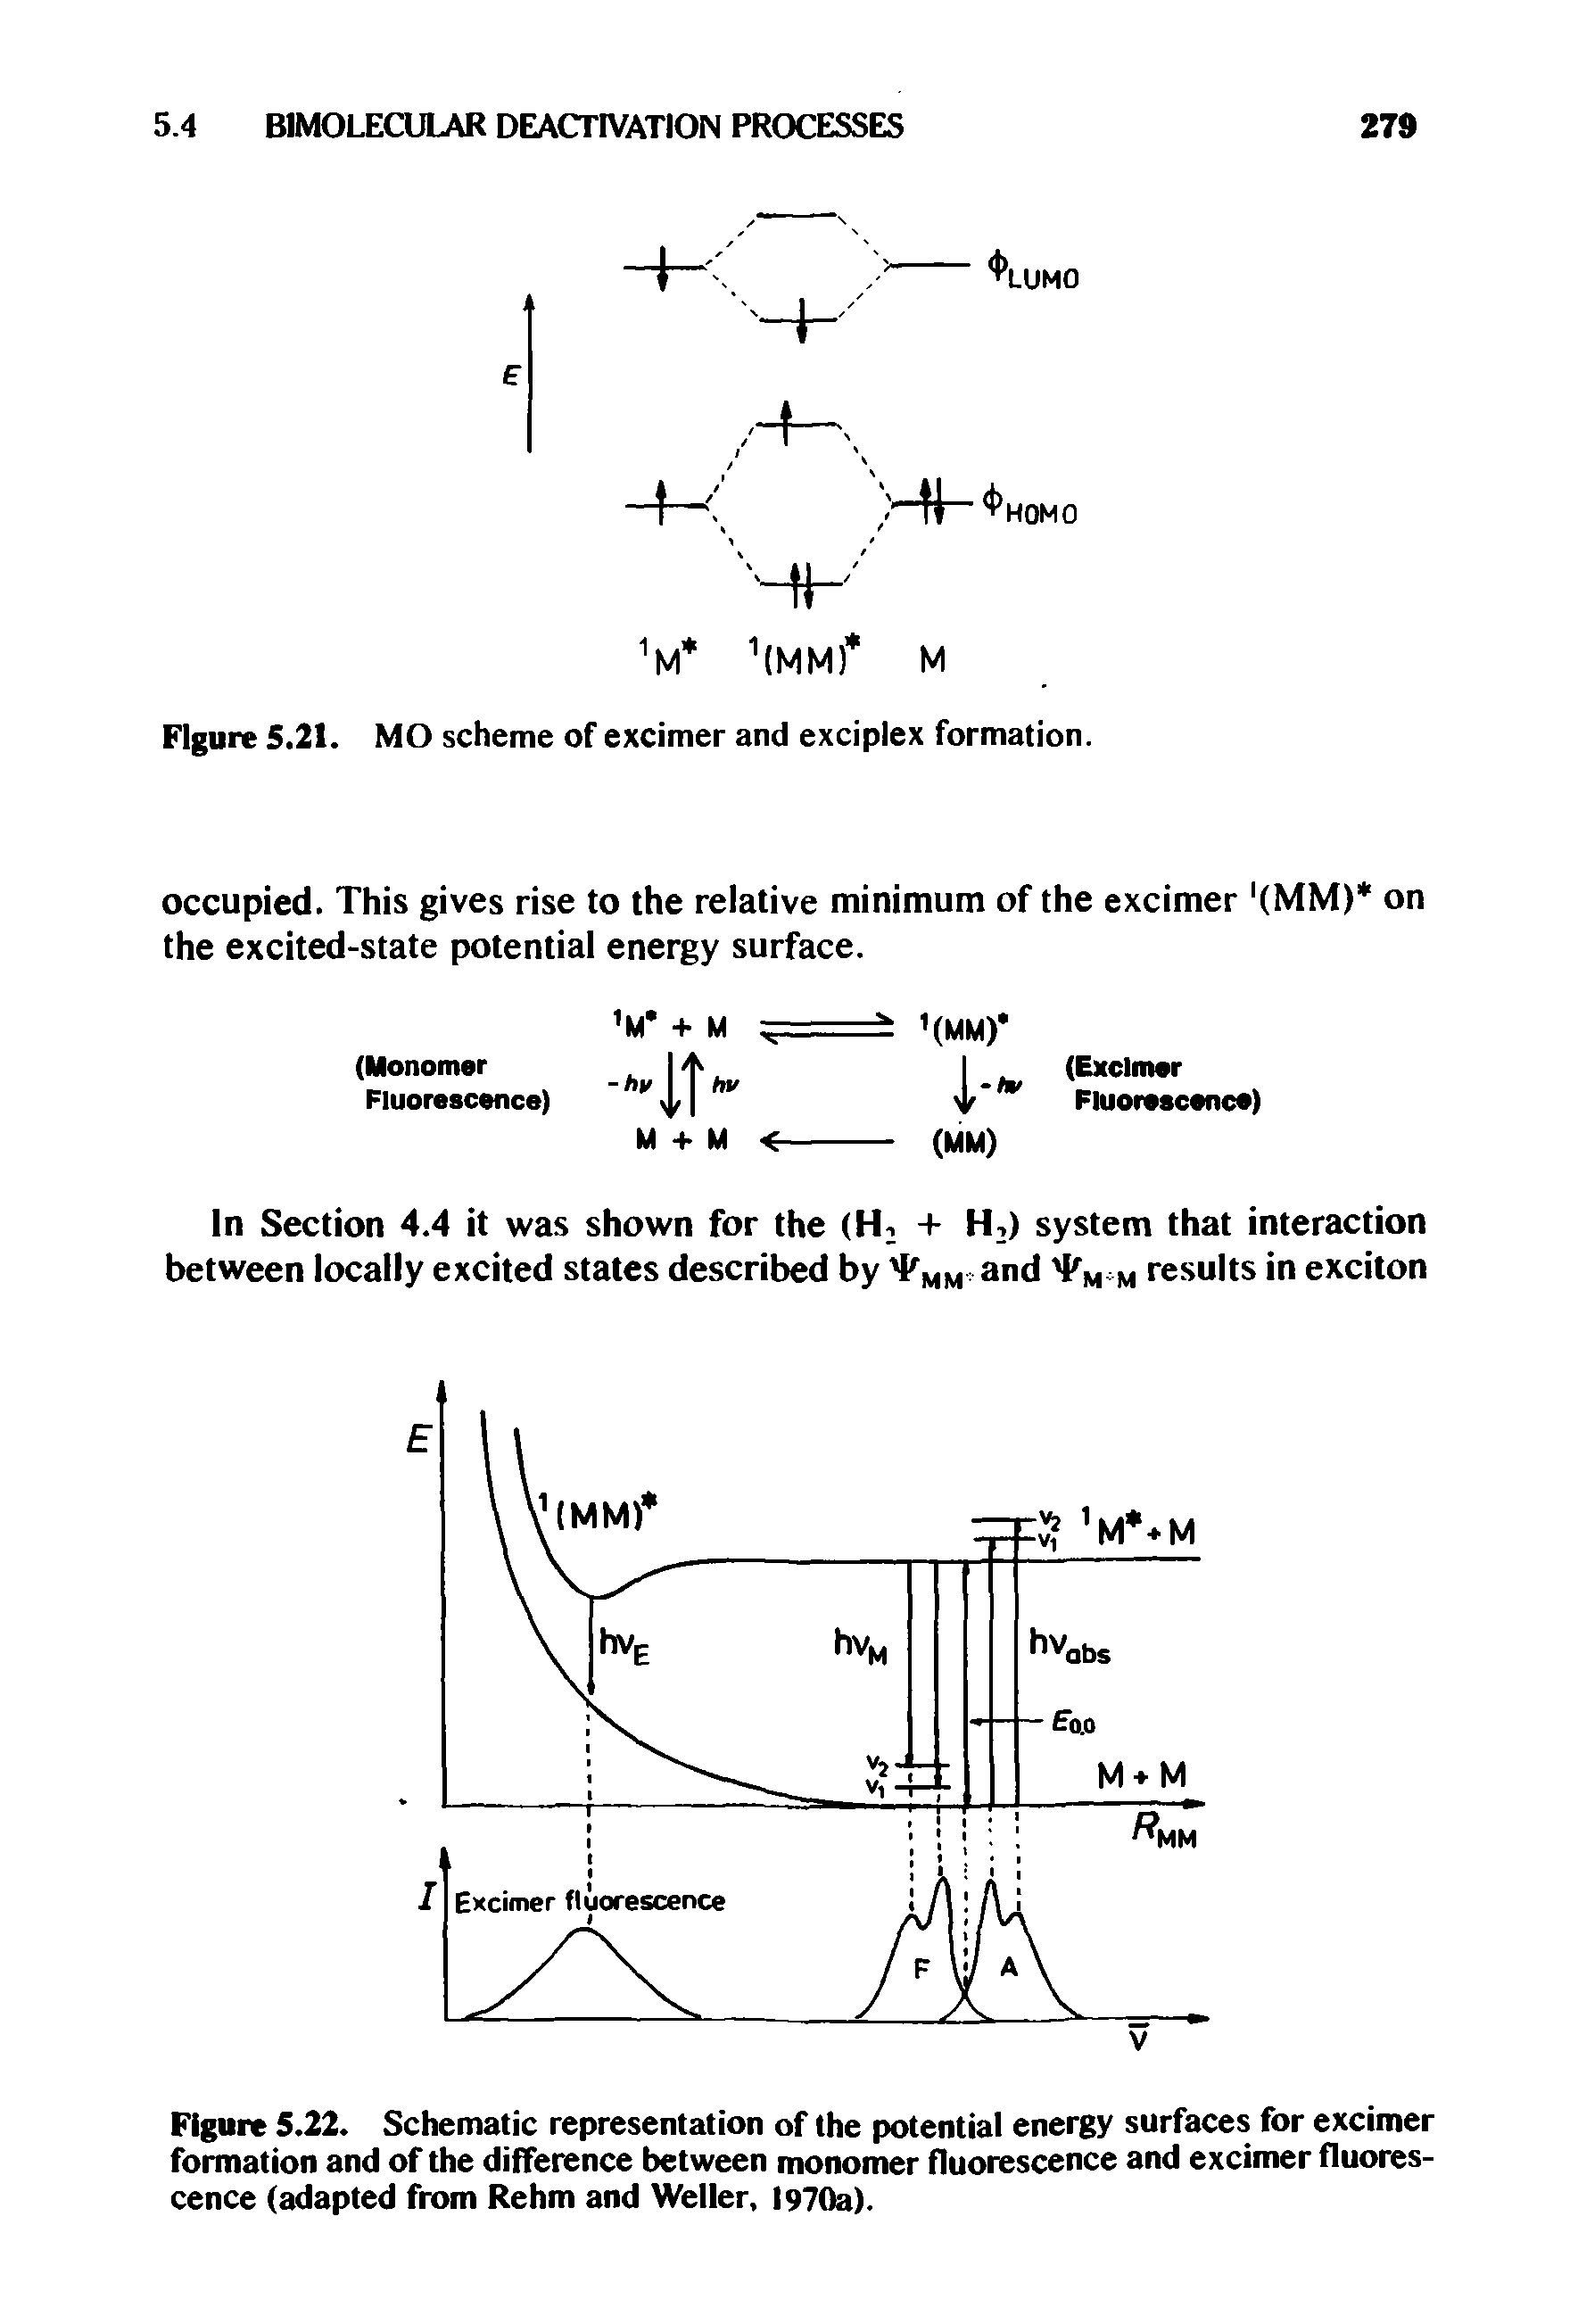 Figure 5.22. Schematic representation of the potential energy surfaces for excimer formation and of the difference between monomer fluorescence and excimer fluorescence (adapted from Rehm and Weller, 1970a).